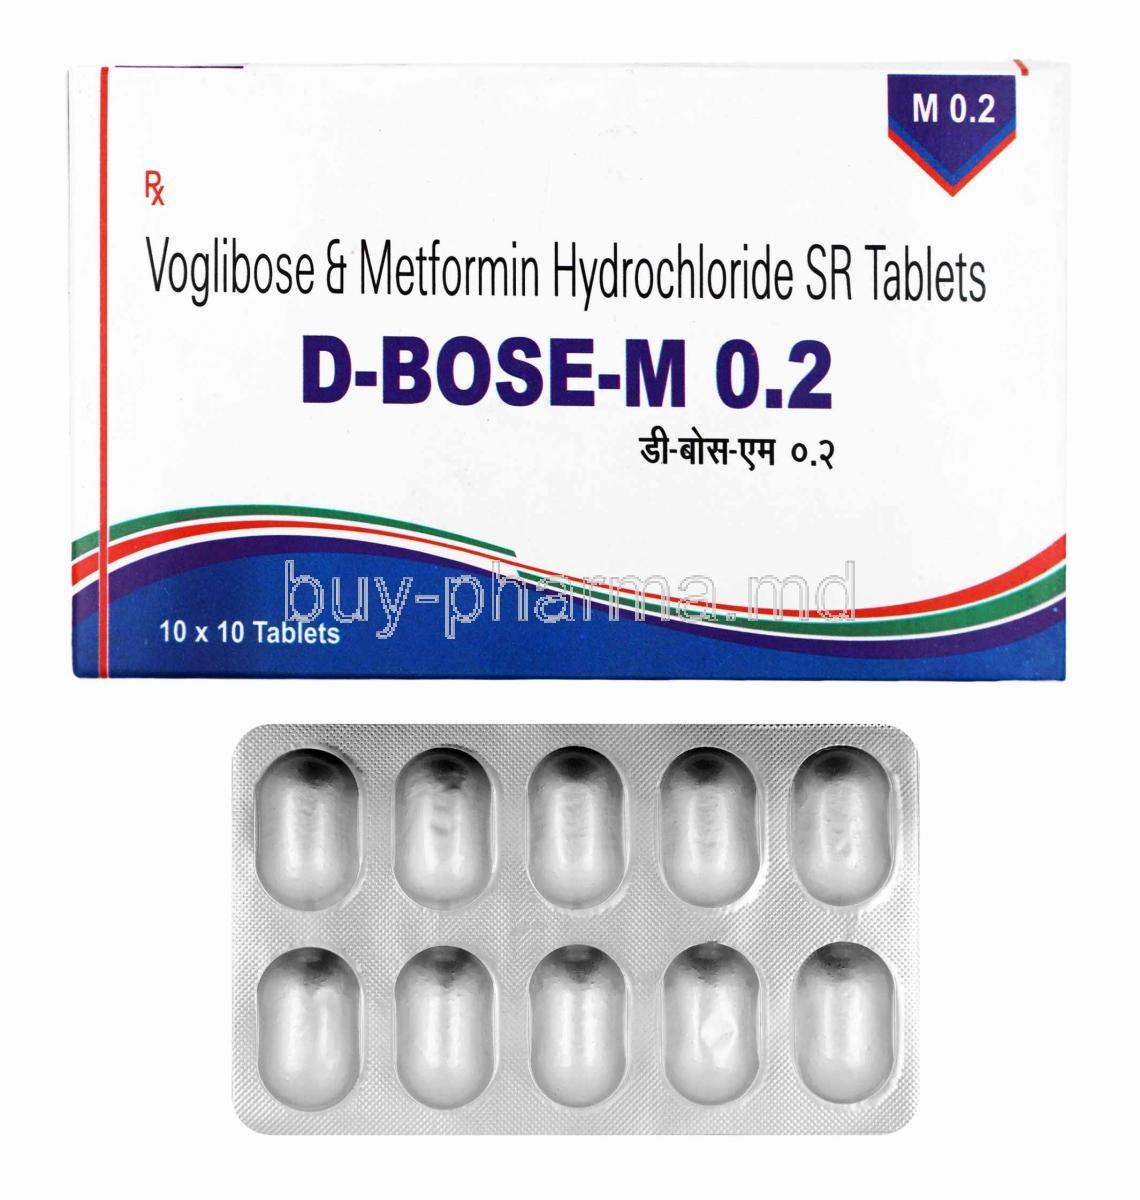 D-Bose-M, Metformin and Voglibose 0.2mg box and tablets